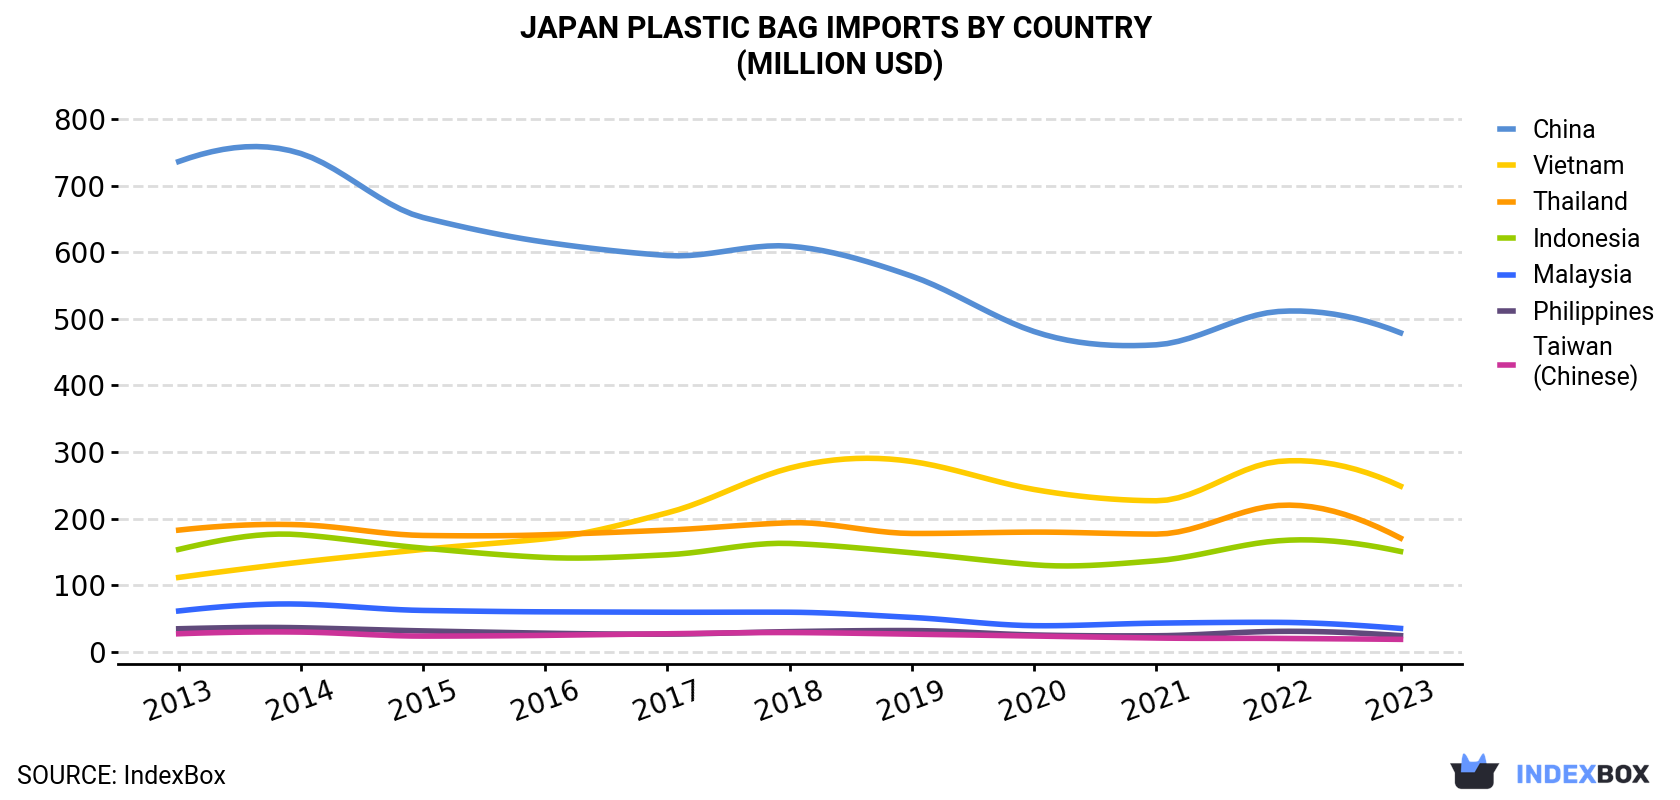 Japan Plastic Bag Imports By Country (Million USD)